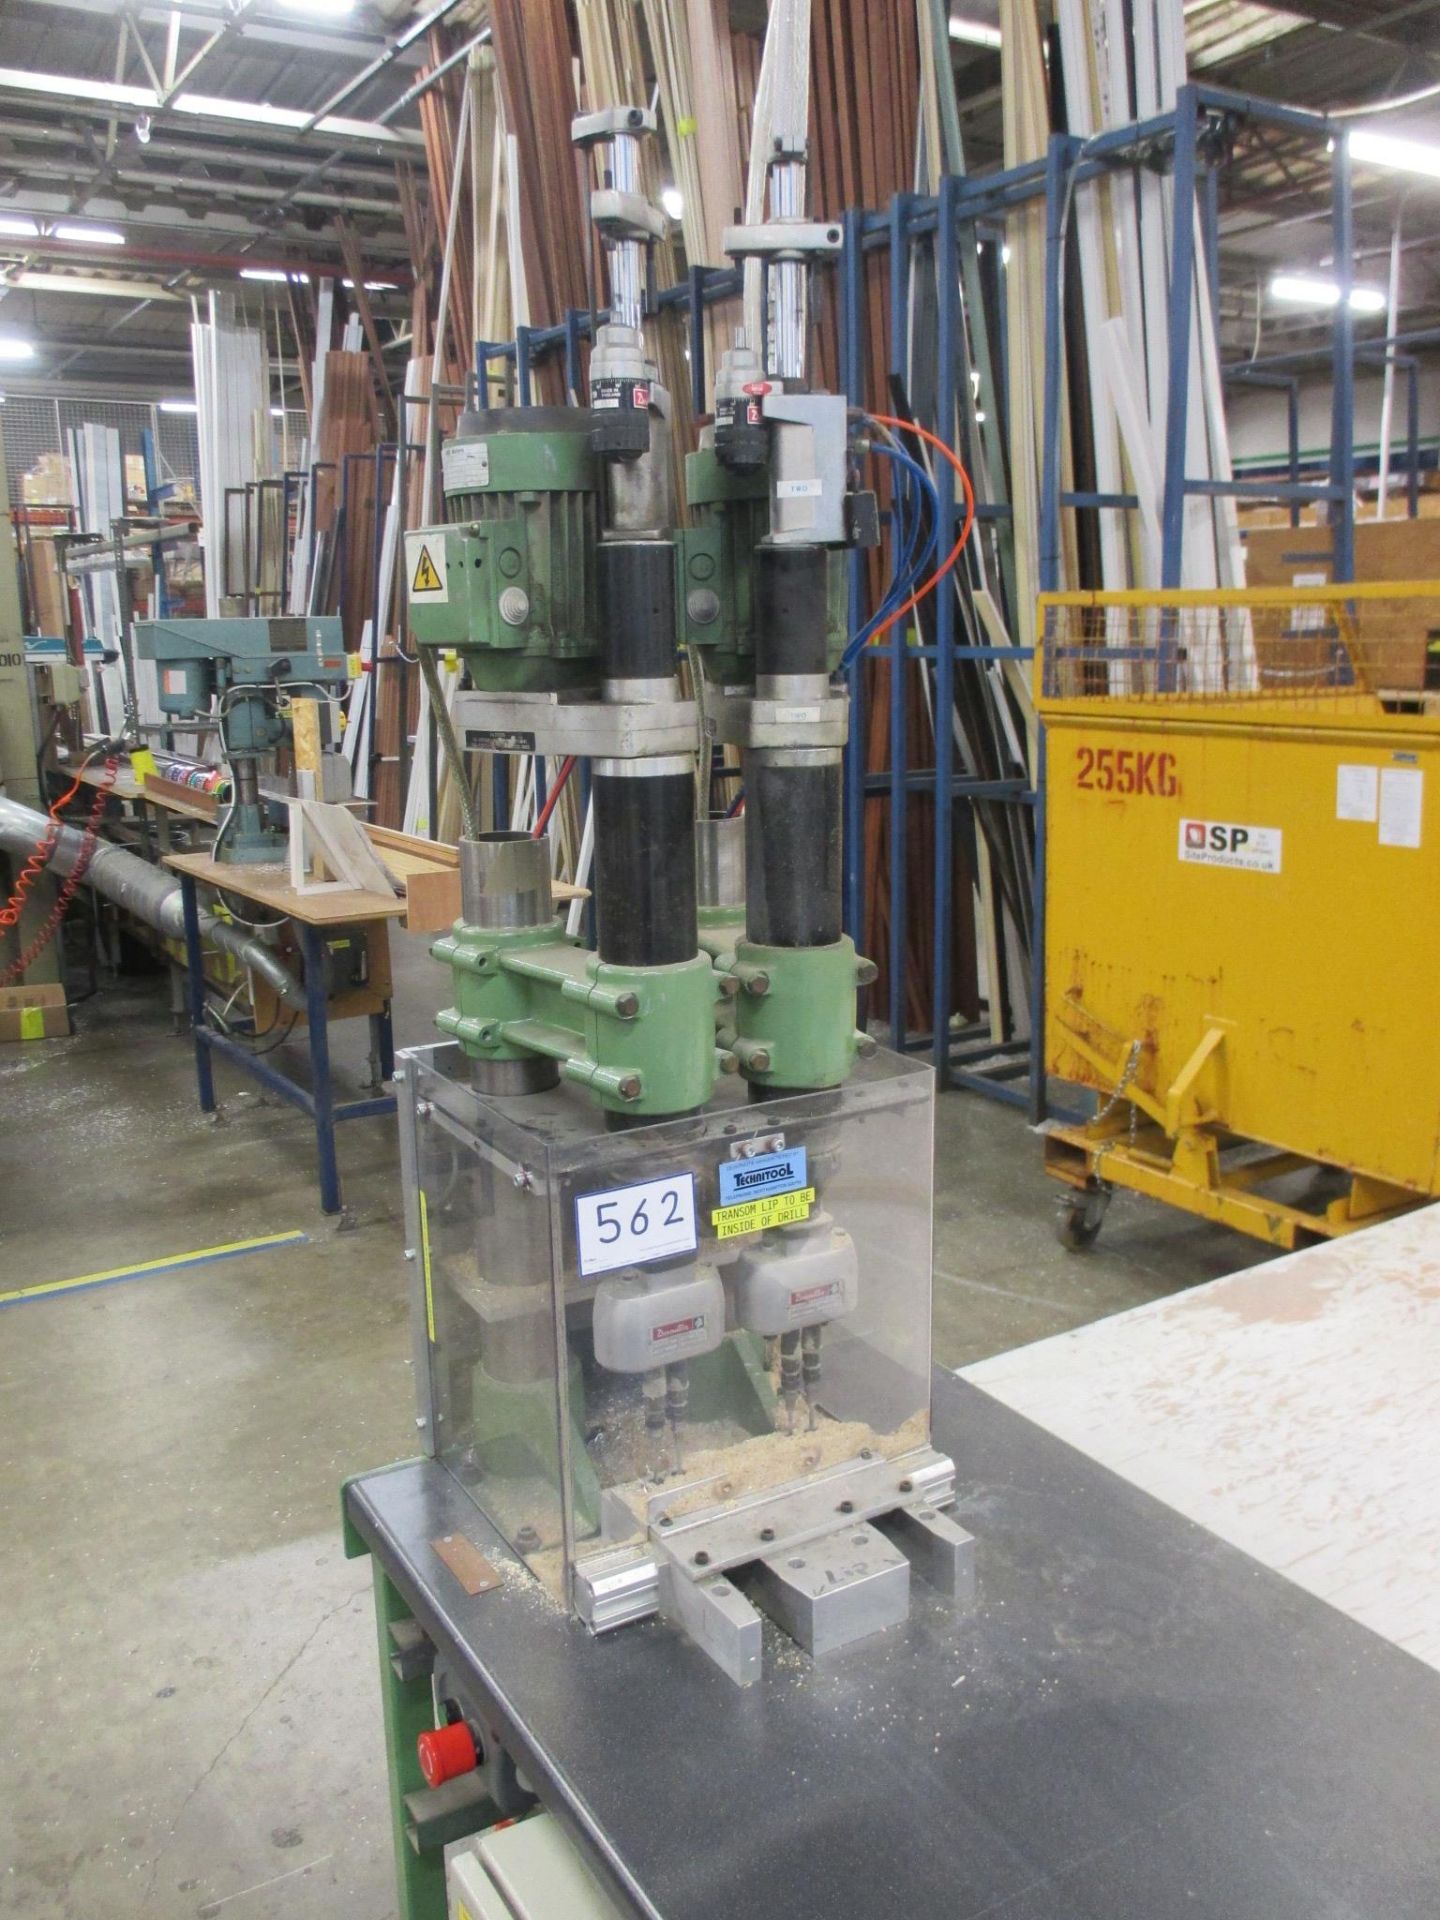 1: Technotool/DeSoutter, Twin Head Pedestal Drill Complete with Bench and DCE Auto Dryex Extraction